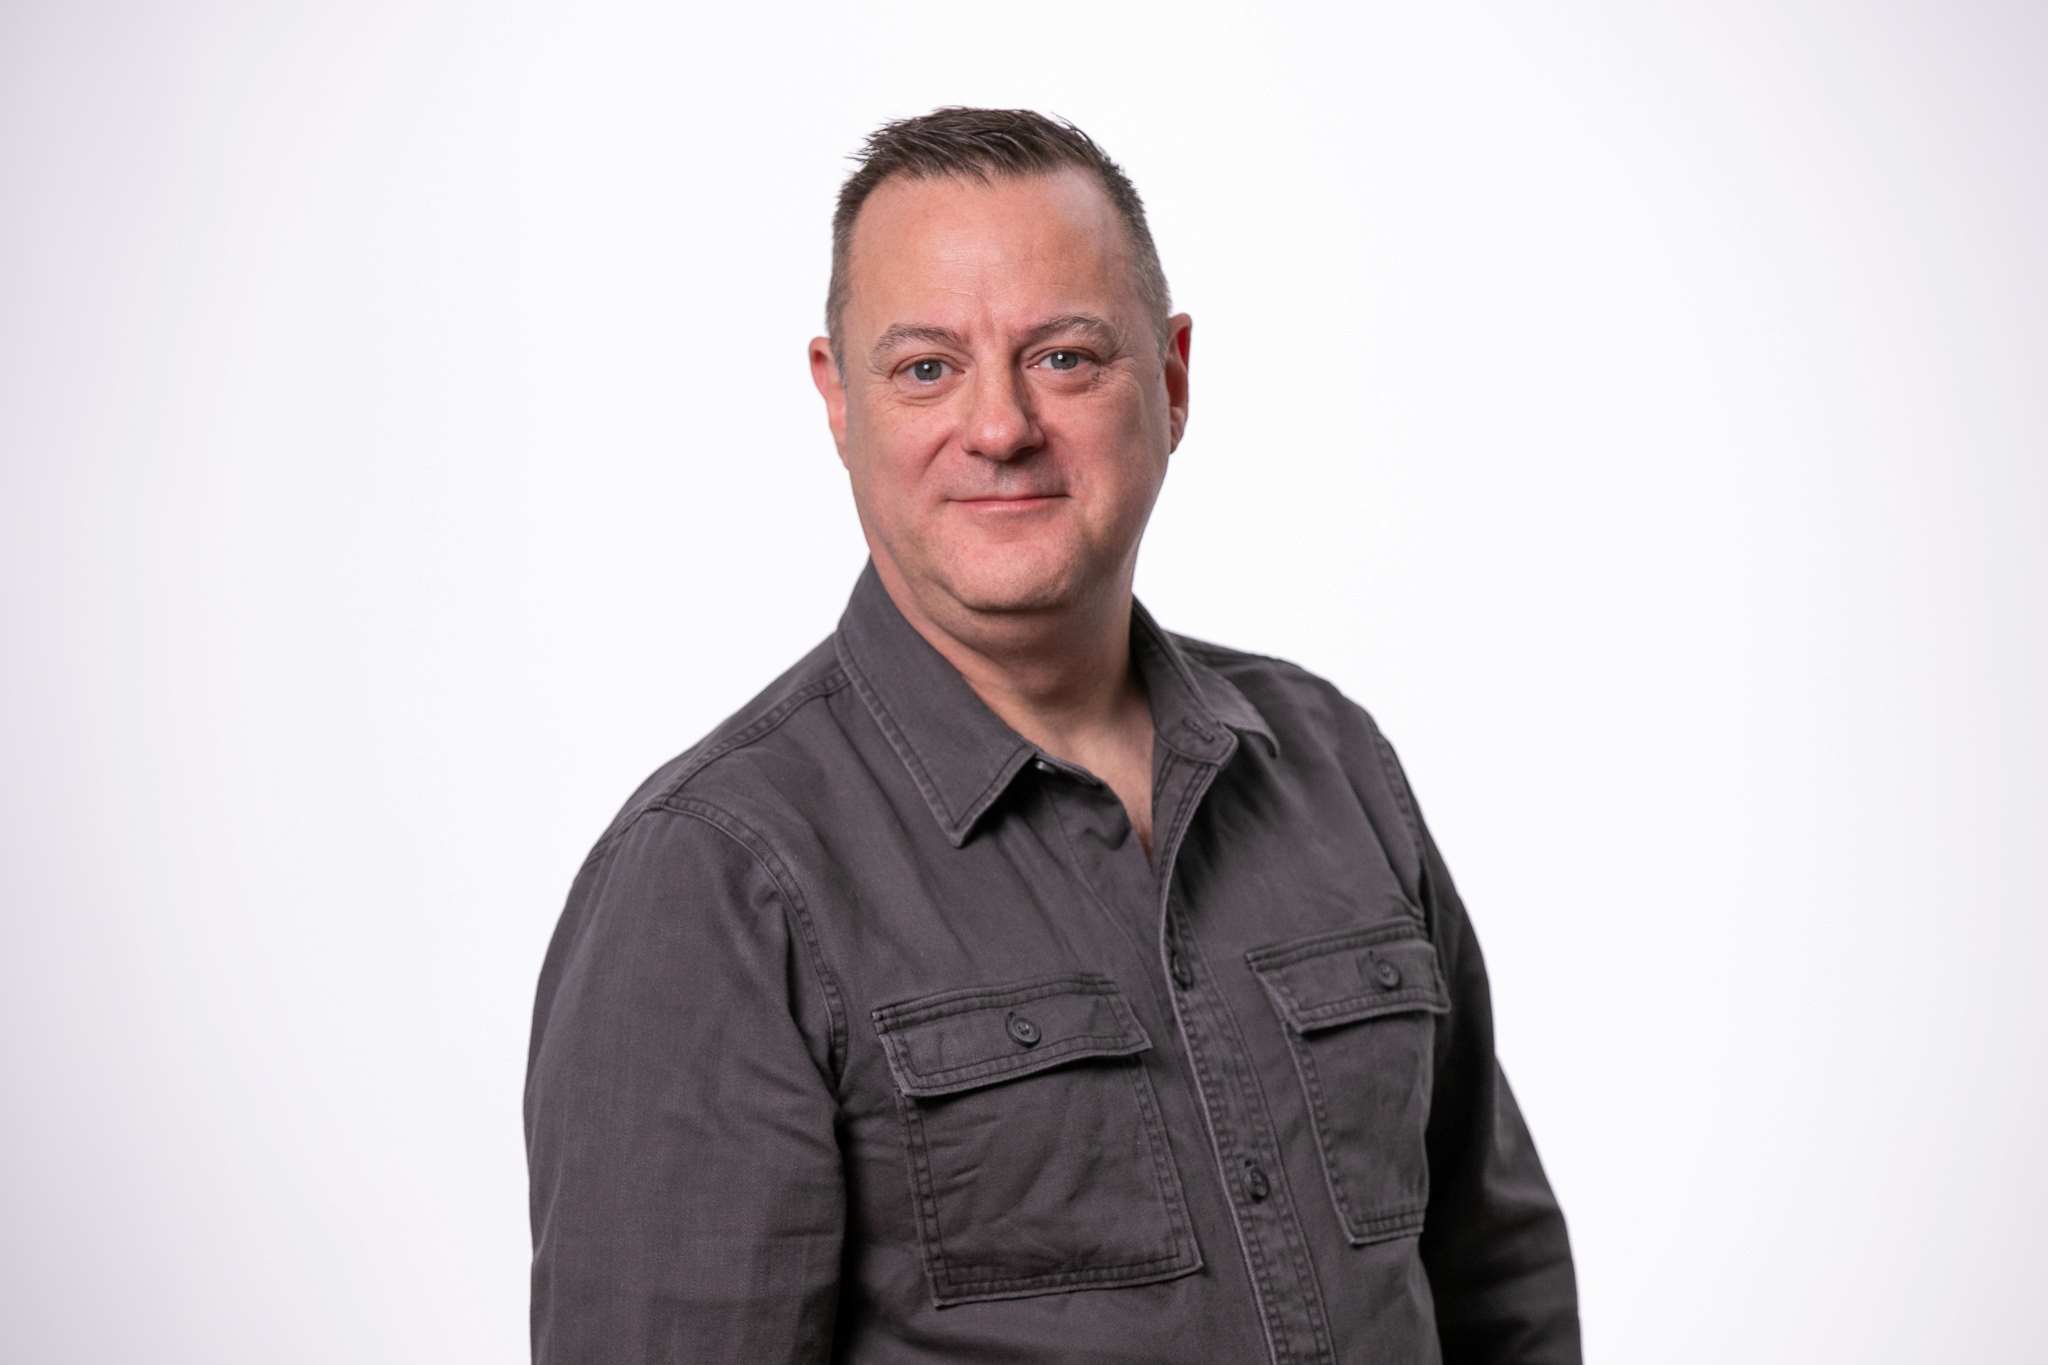 A headshot of Simon Daly being appointed as Commercial Strategy Lead of Ergo